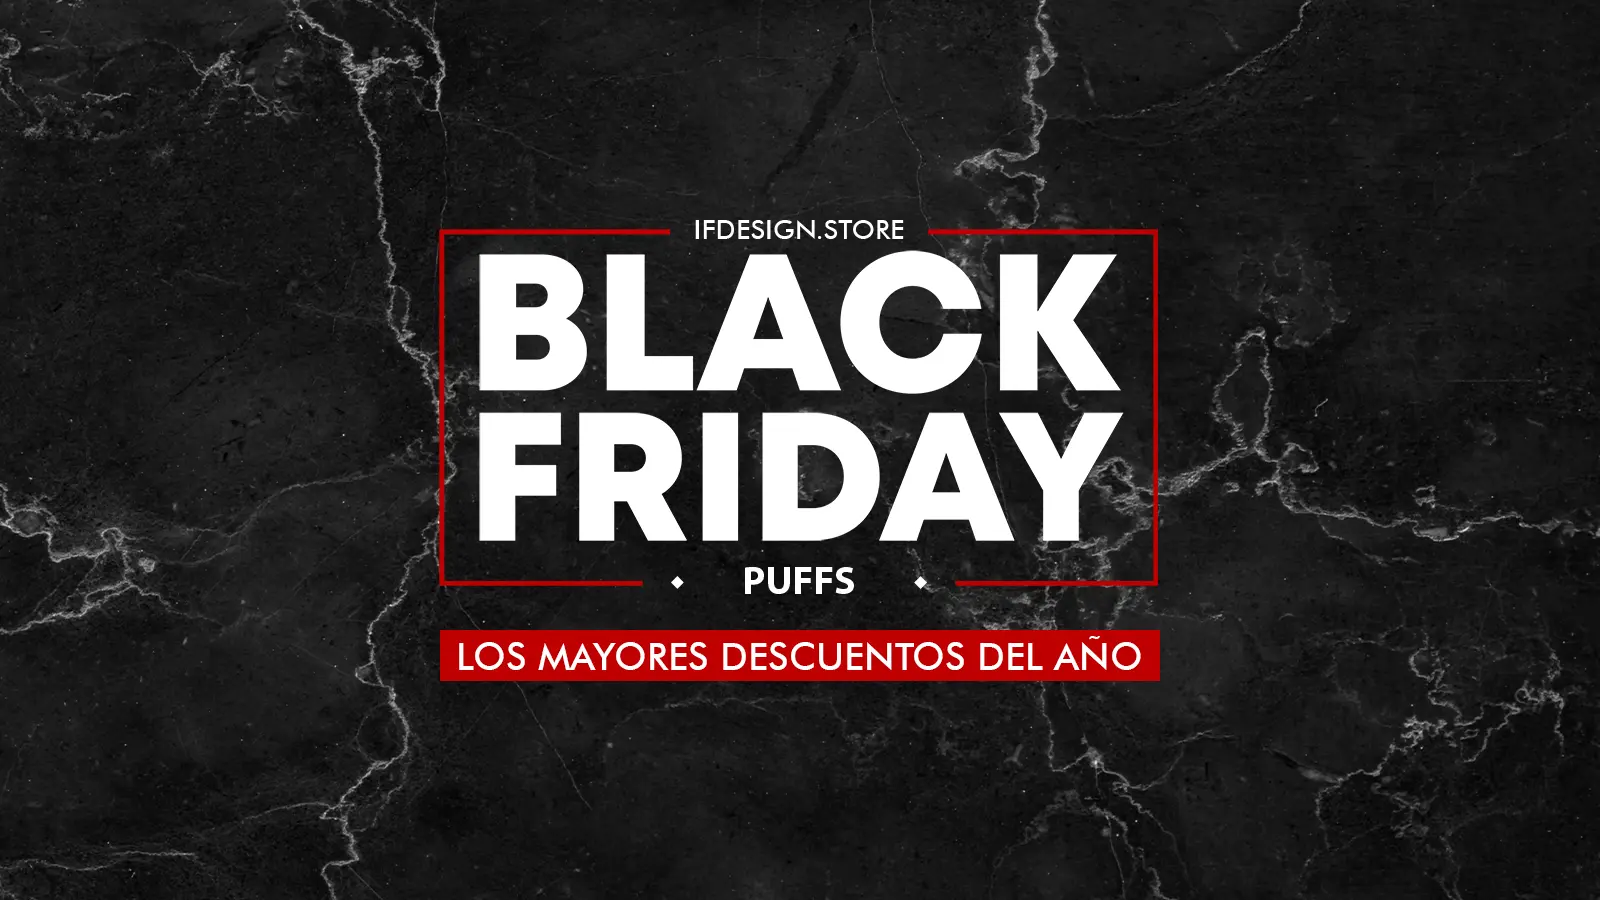 black-friday-puffs-2023-ifdesign-store-002